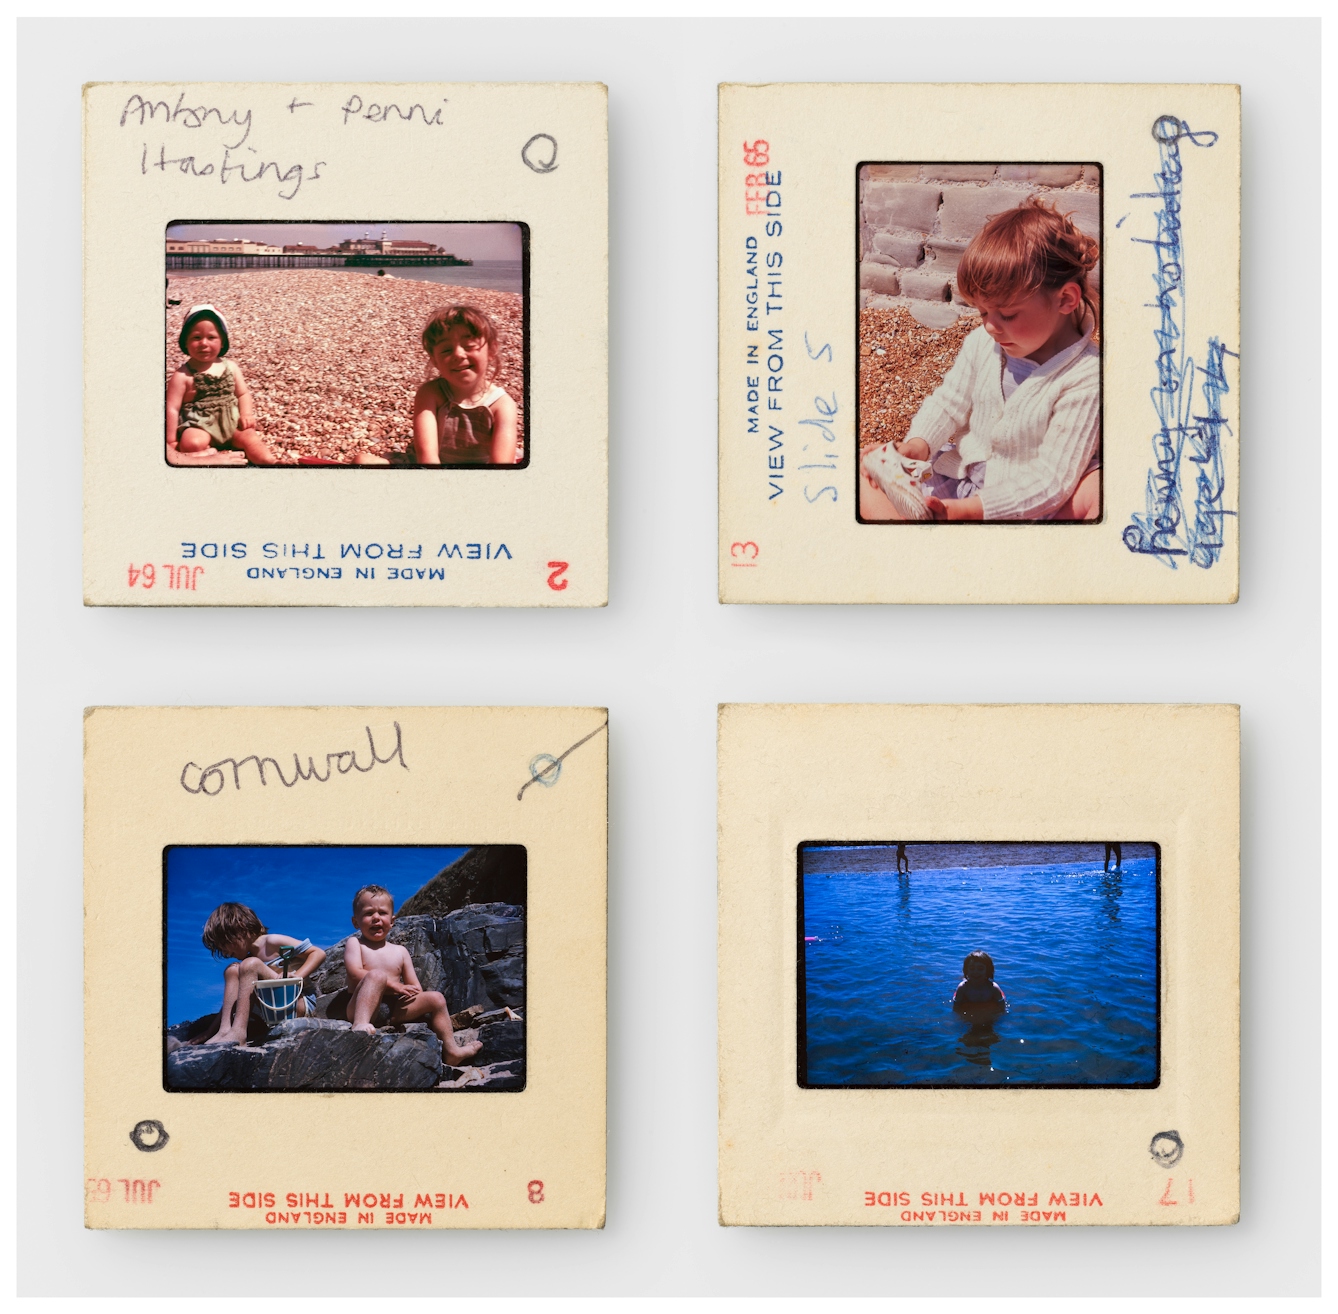 Photograph of four colour 35mm transparencies in a 2 by 2 grid, each mounted in a cardboard side holder, all resting on a white background. The transparencies on the top row show a young girl and her brother on holiday sitting on a shingle beach. In one image there is a pier in the background. The slide mounts have the words 'made in England. View from this side' printed on them.  Hand written notes on the mounts read, "Antony and Penni Hastings" and "Slide 5". The transparencies on the bottom row show the same siblings but on a different beach with large rocks and a deep blue coloured sea. The slide mounts have the words 'made in England. View from this side' printed on them.  A hand written note on one of the mounts reads, "Cornwall".